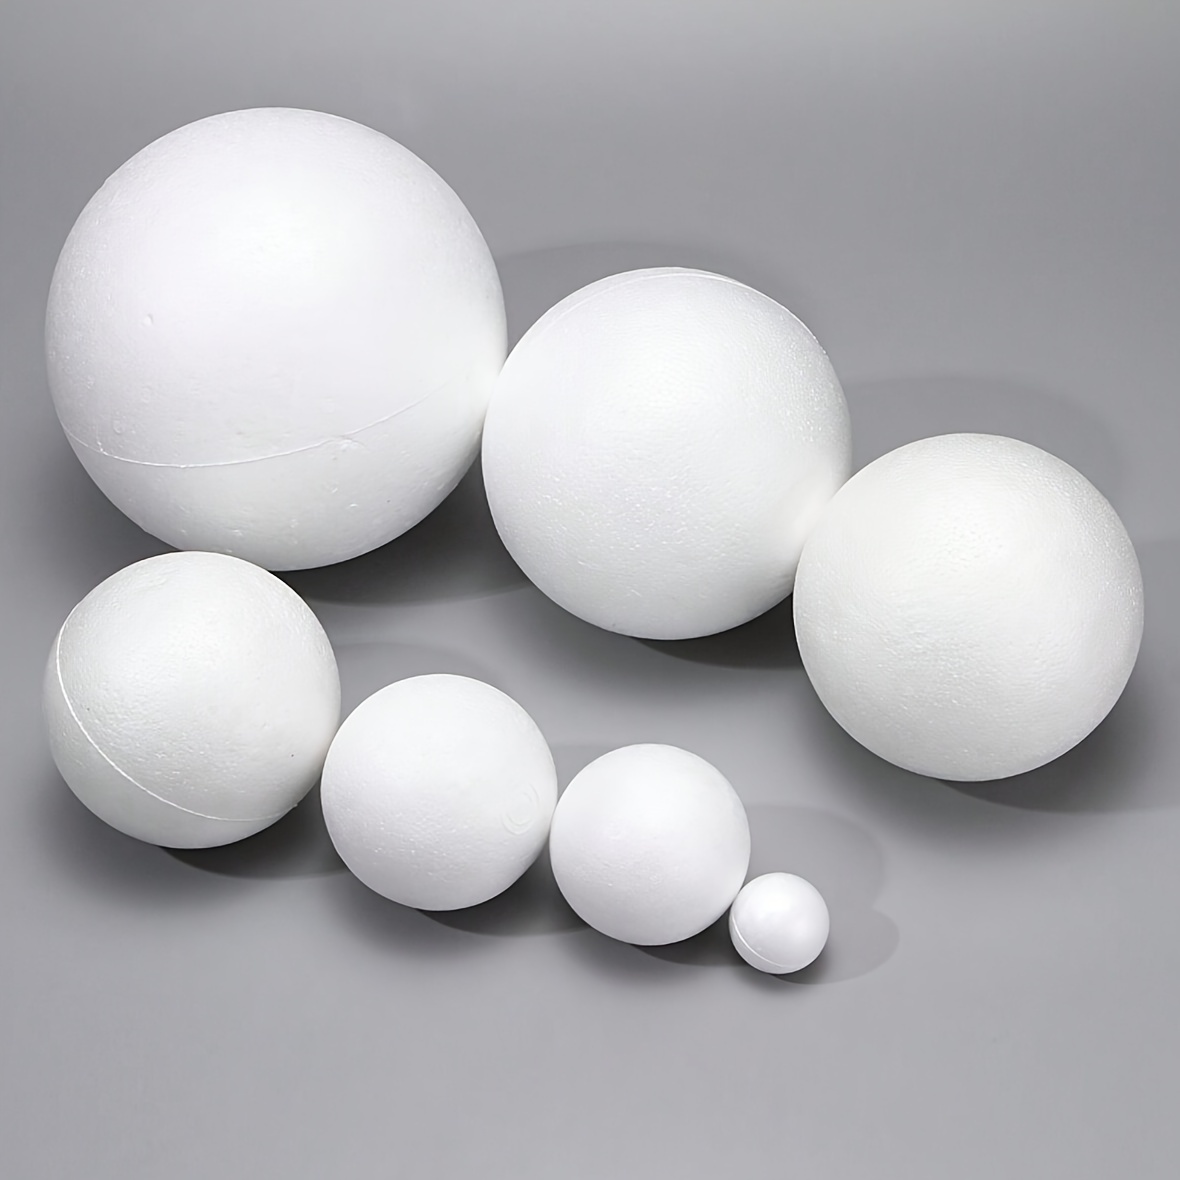 8 inch 4 pcs White Half Round Solid Foam Ball Project Wedding Party